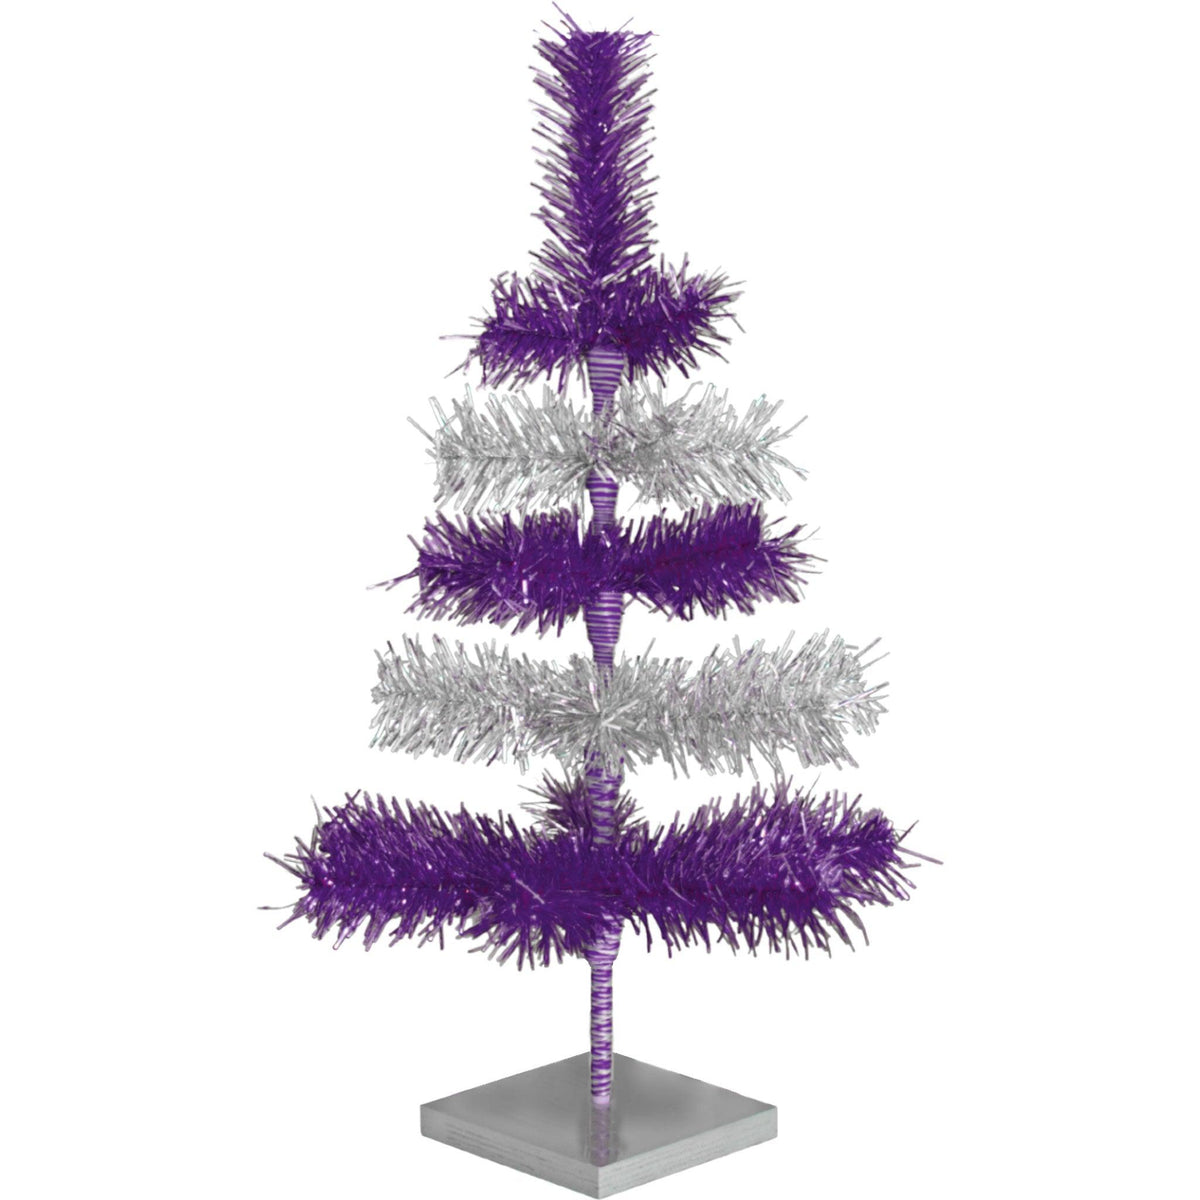 Purple & Silver Layered Tinsel Christmas Trees!    Decorate for the holidays with a Shiny Purple and Metallic Silver retro-style Christmas Tree.  On sale now at leedisplay.com